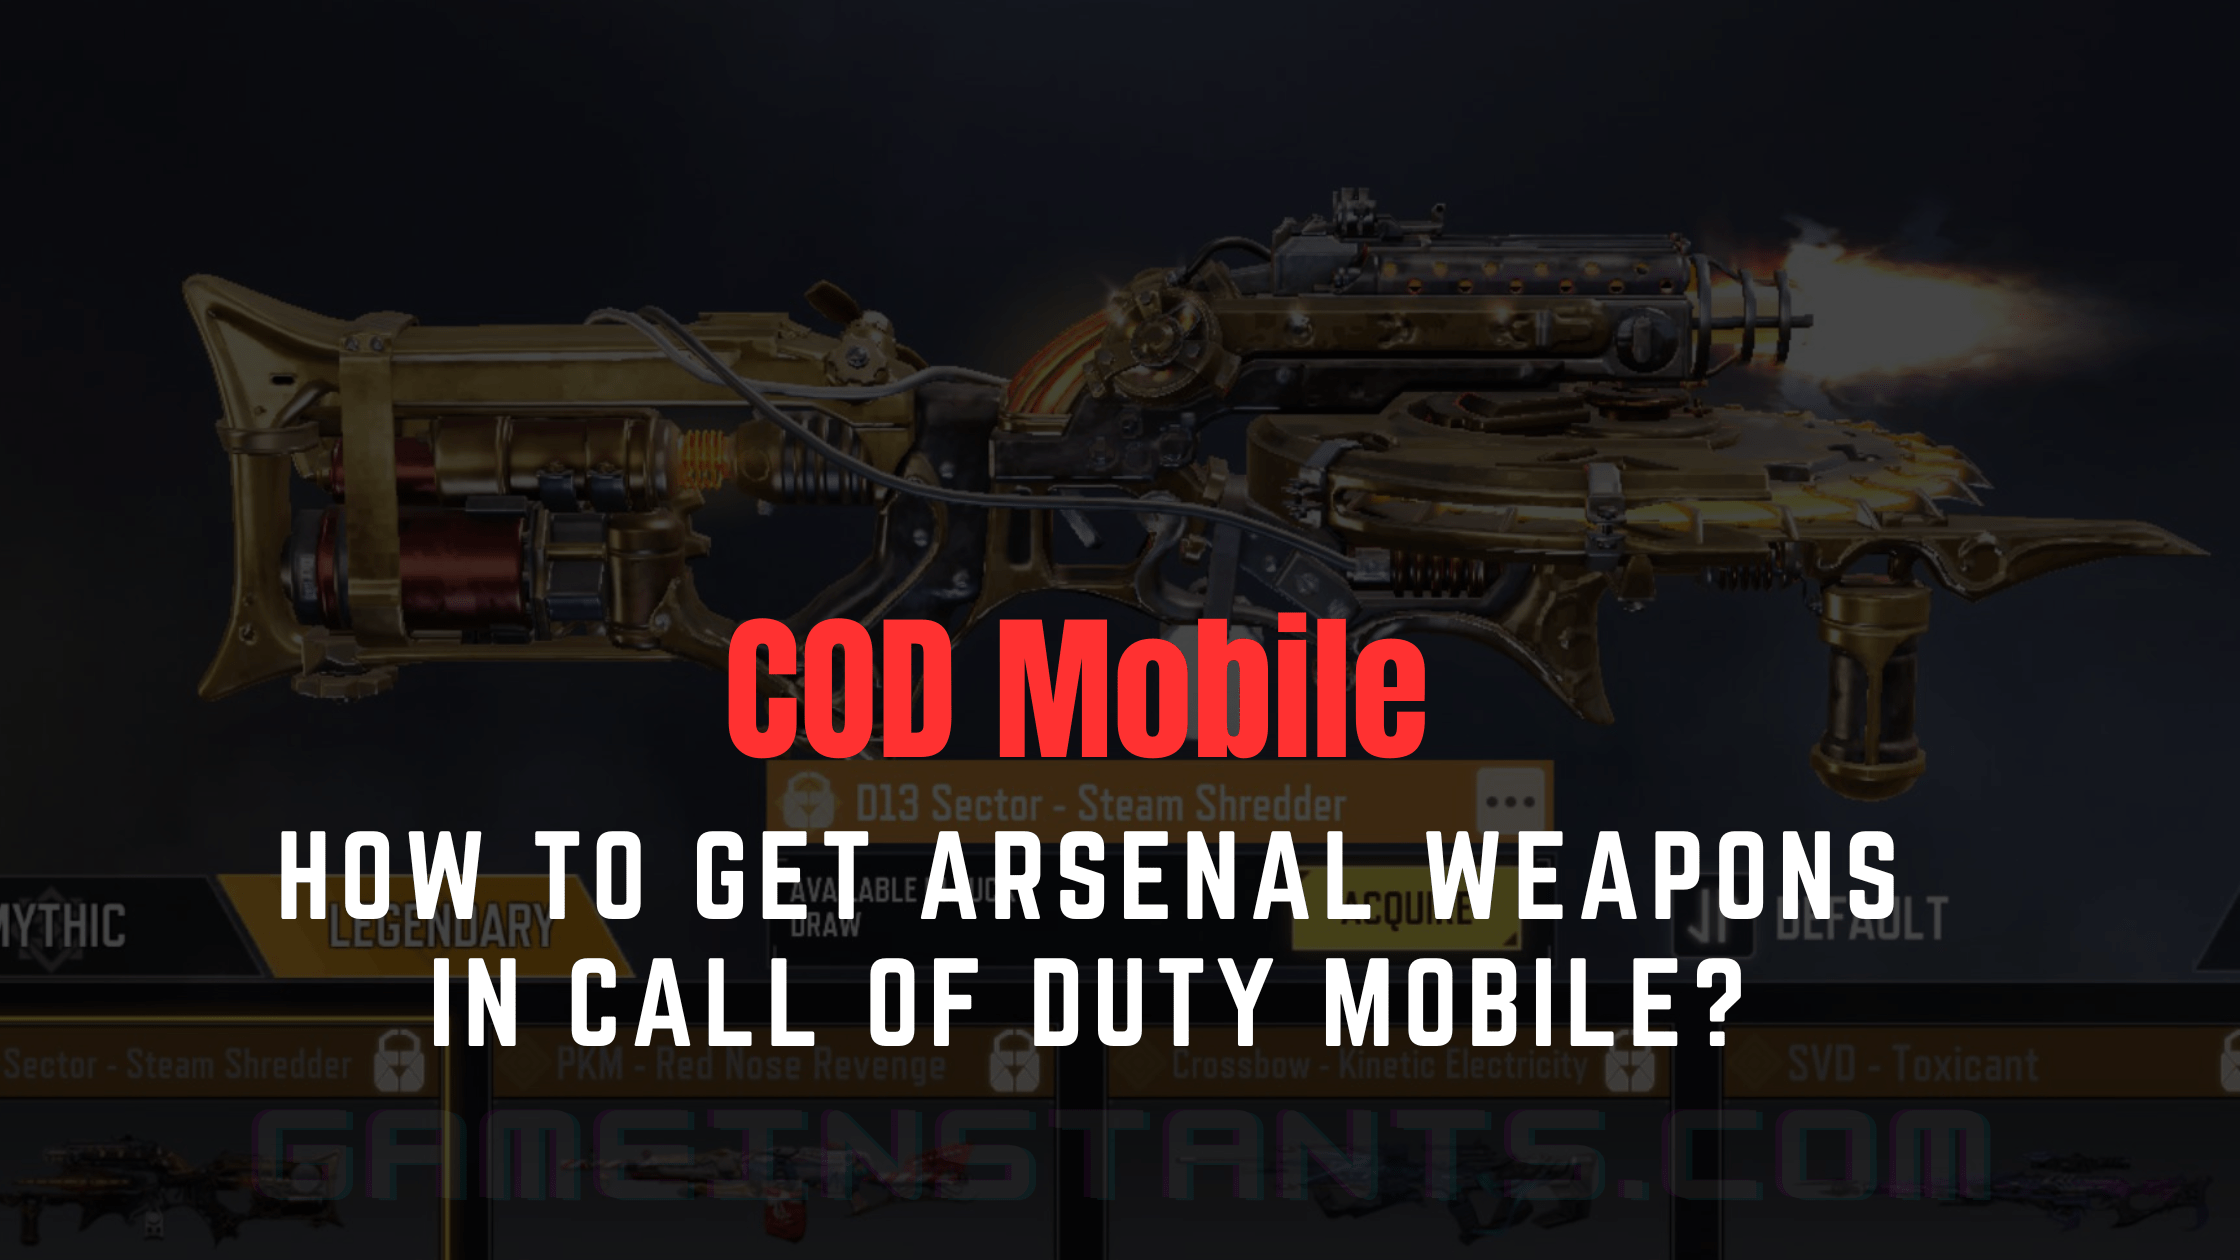 How to get arsenal guns in call of duty mobile